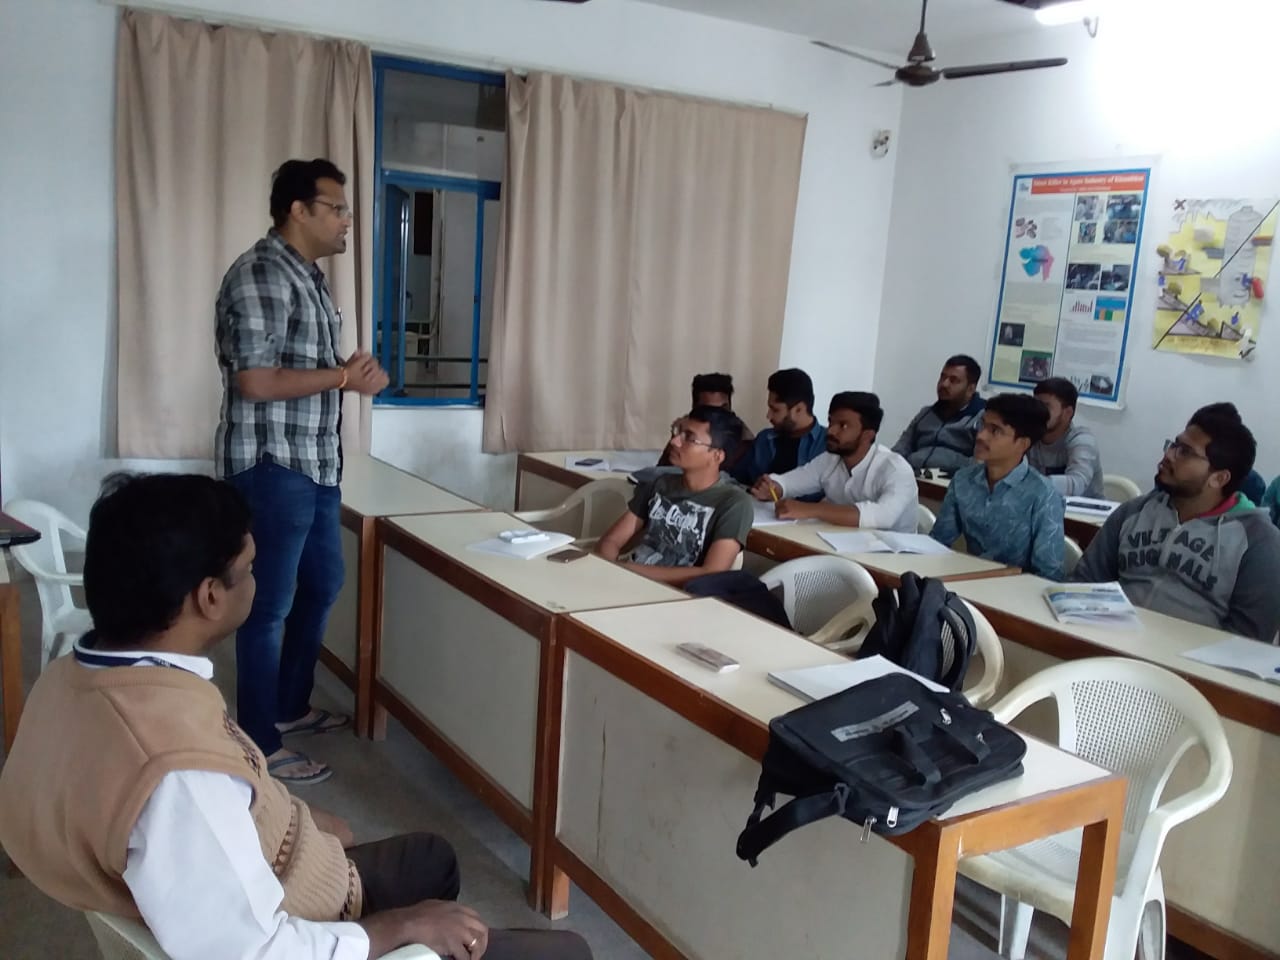 Mr. Dhruvit Mehta our Alumni with Mittal -HPCL Refinery Bhatinda giving an expert lecture on Ih in refinery.